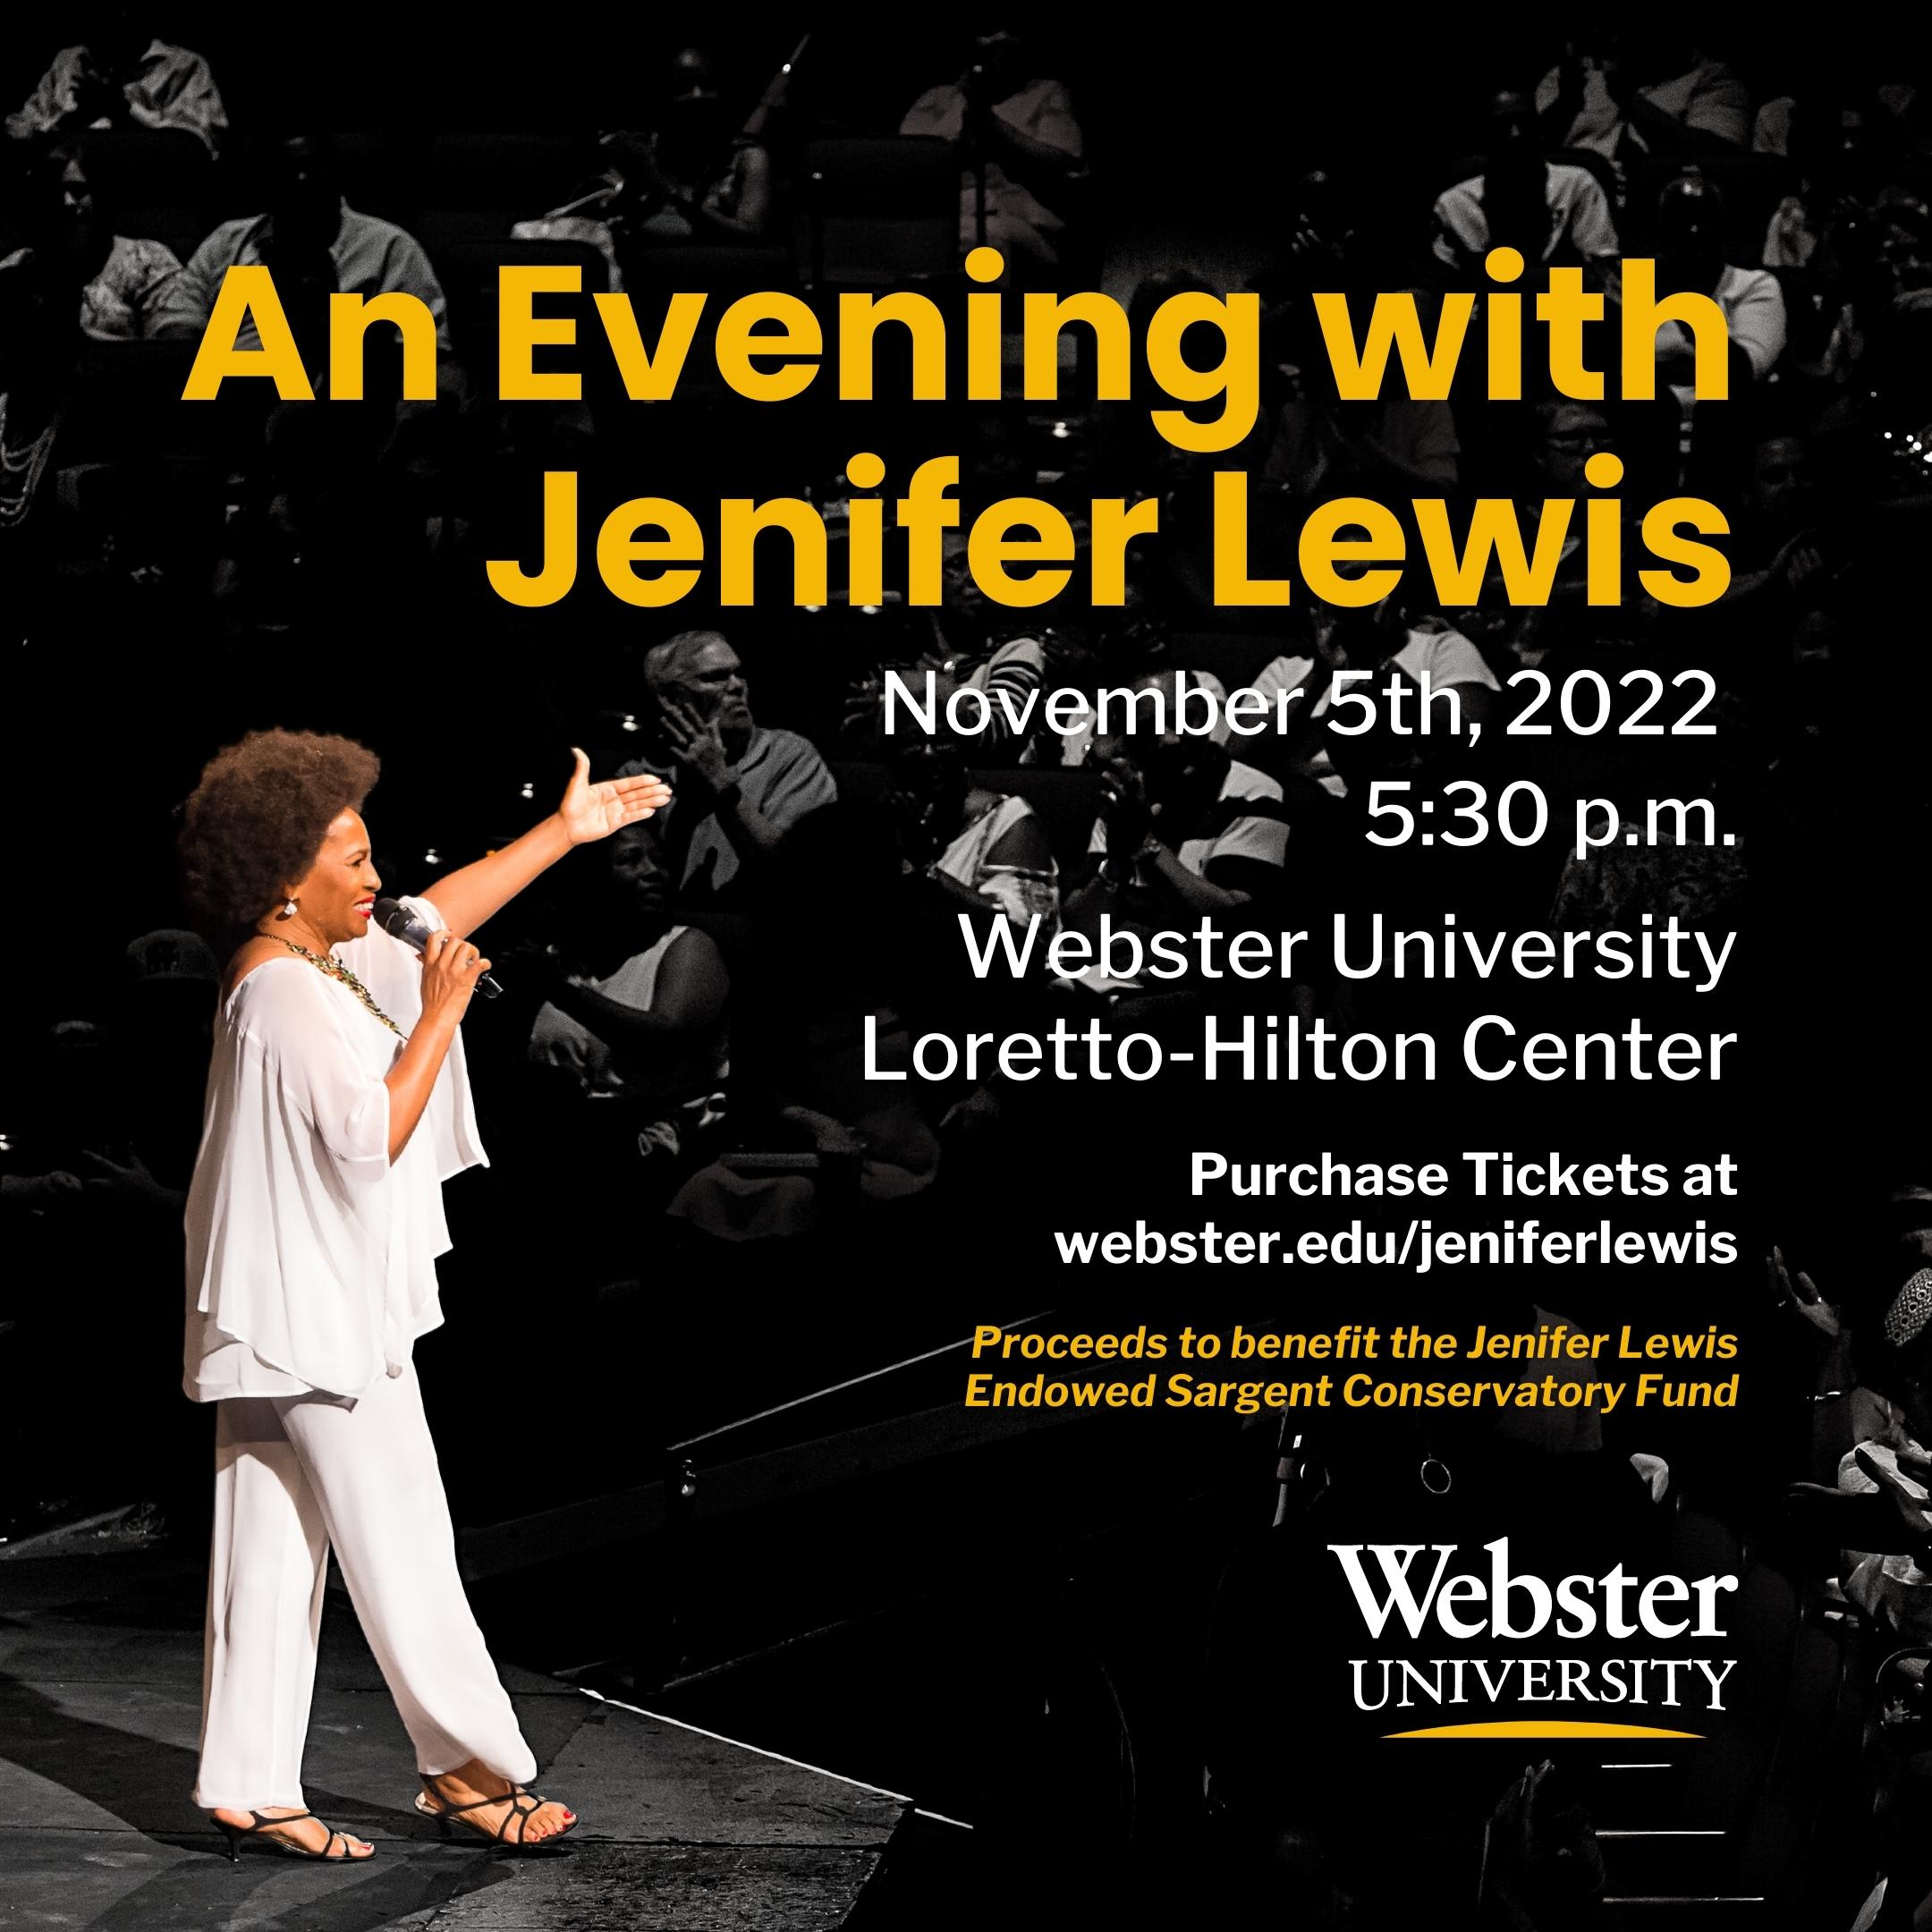 An Evening With Jenifer Lewis